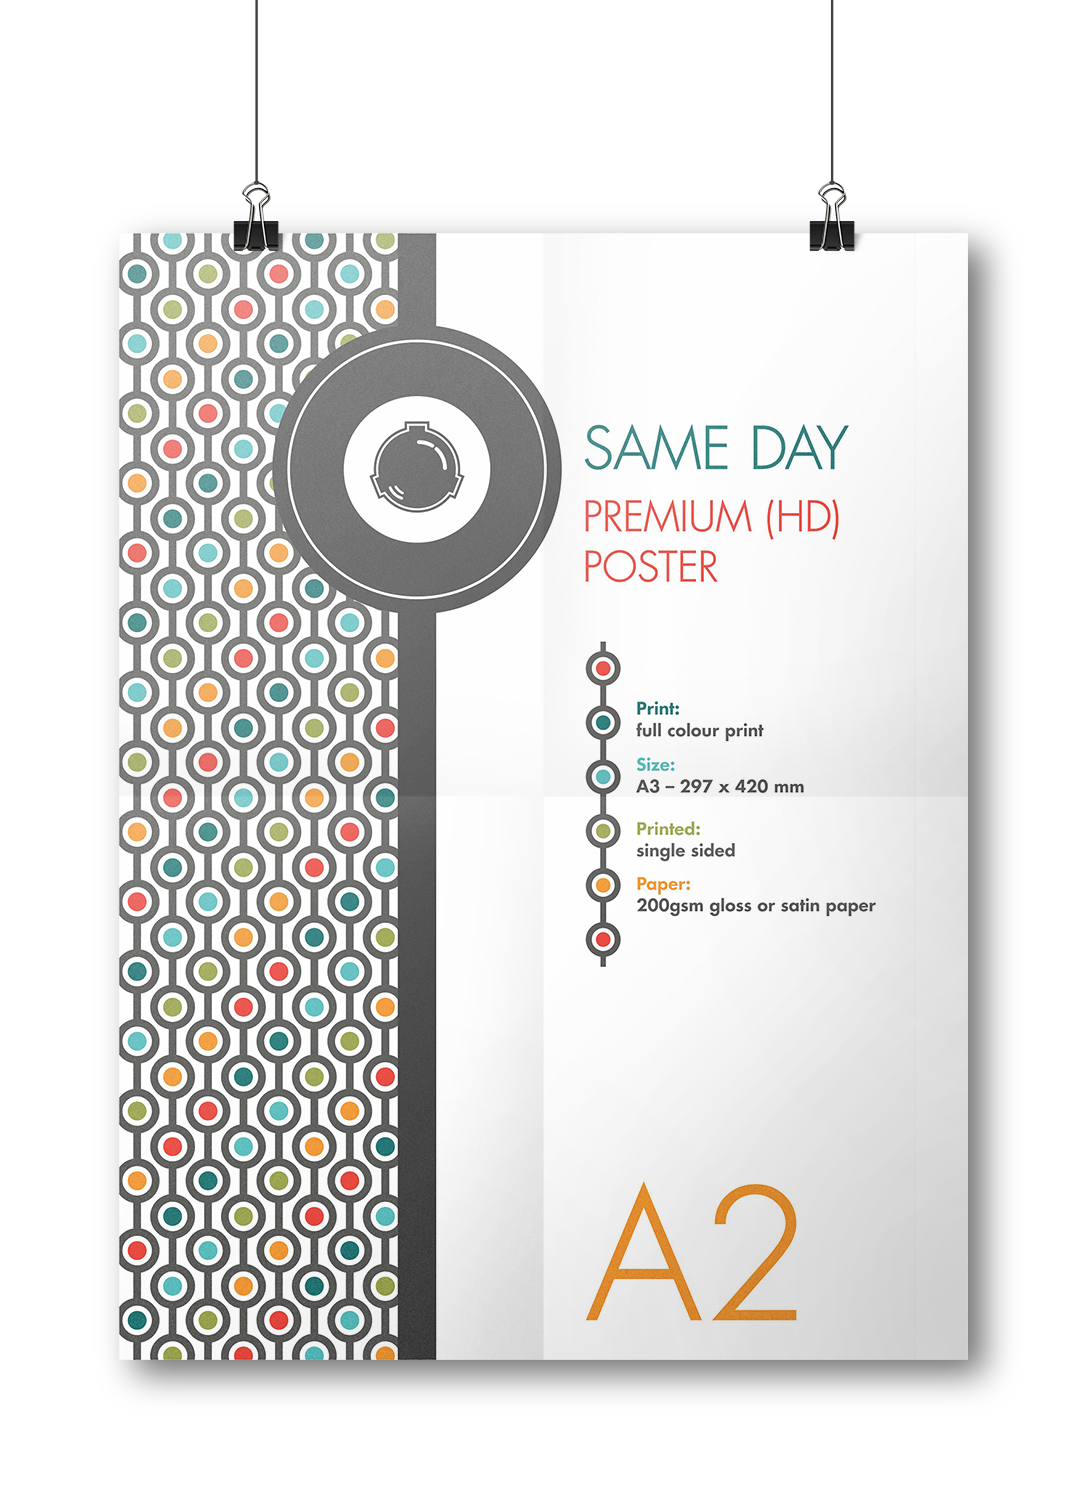 Premium A2 Poster In London Poster London Poster Printing 2781